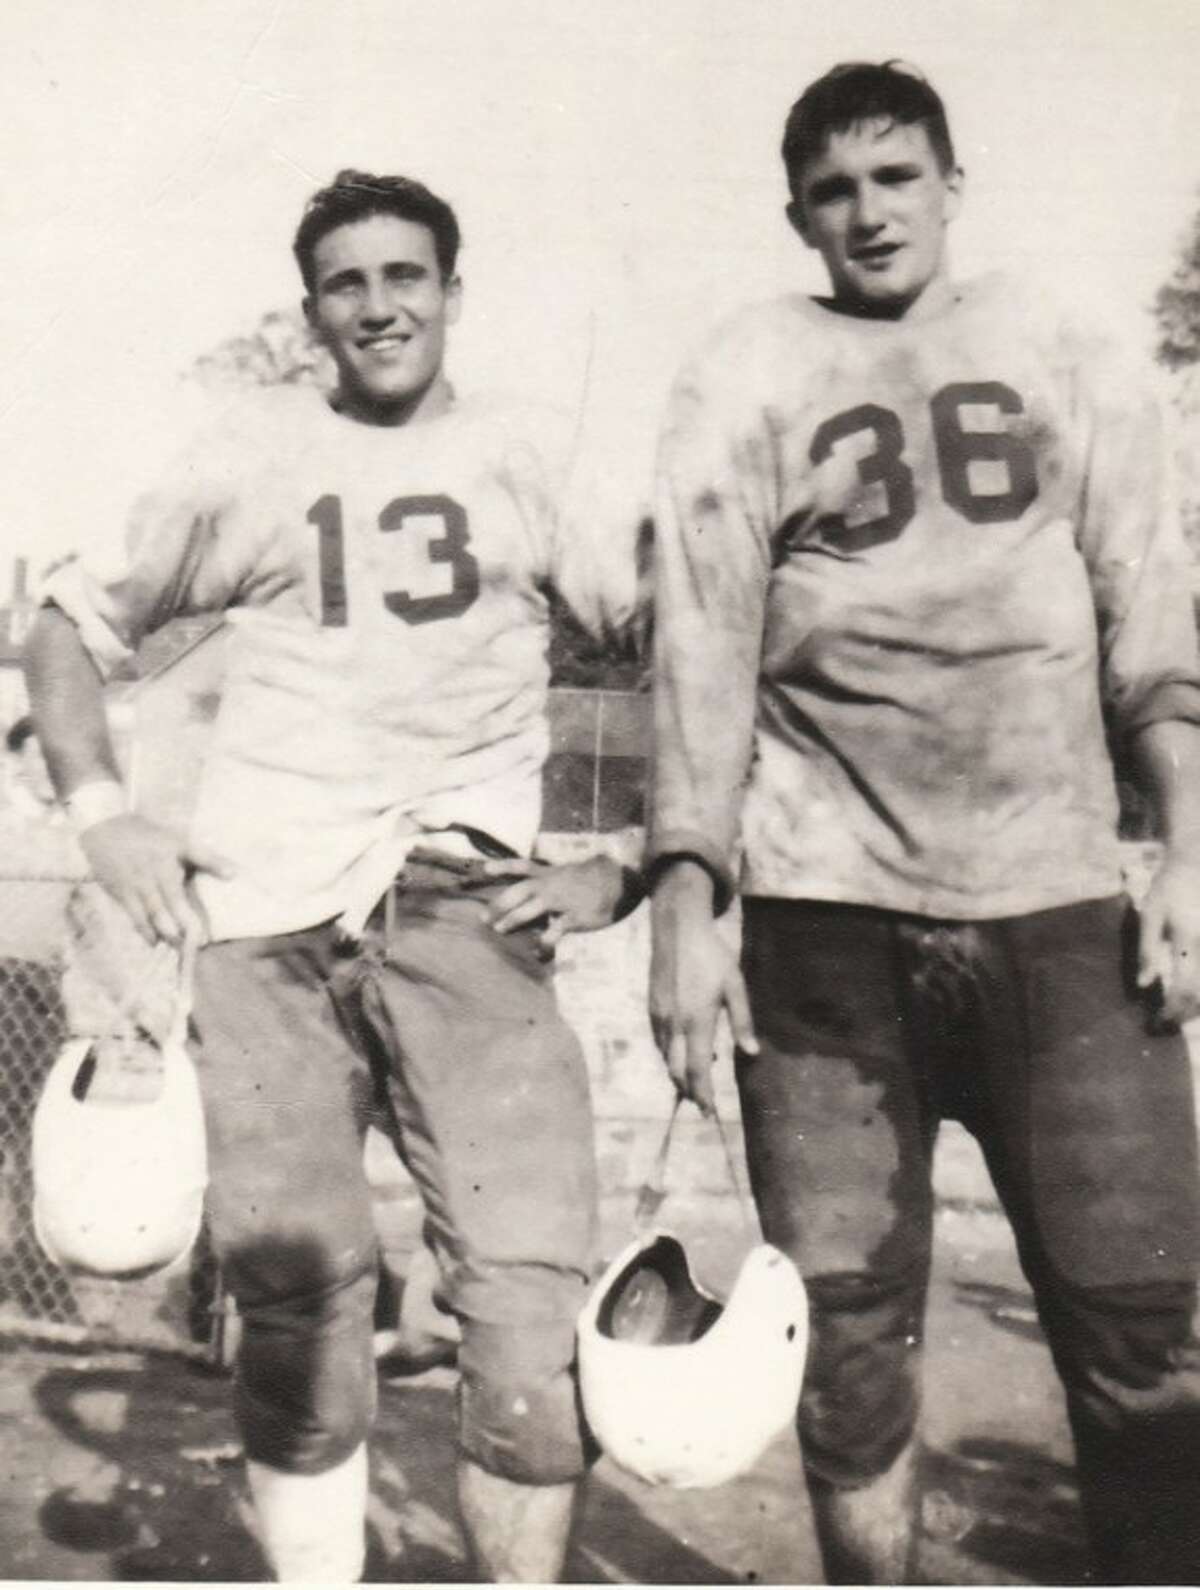 Callahan family photo The late Bobby Callahan, the former chief justice of the Connecticut Supreme Court, is shown with his Norwalk High School backfield running mate Al Palumbo (13) during the 1945 season when the dynamic duo helped lead NHS to the County championship. The two formed a lifelong friendship that endured right up until Callahan passed away last week.